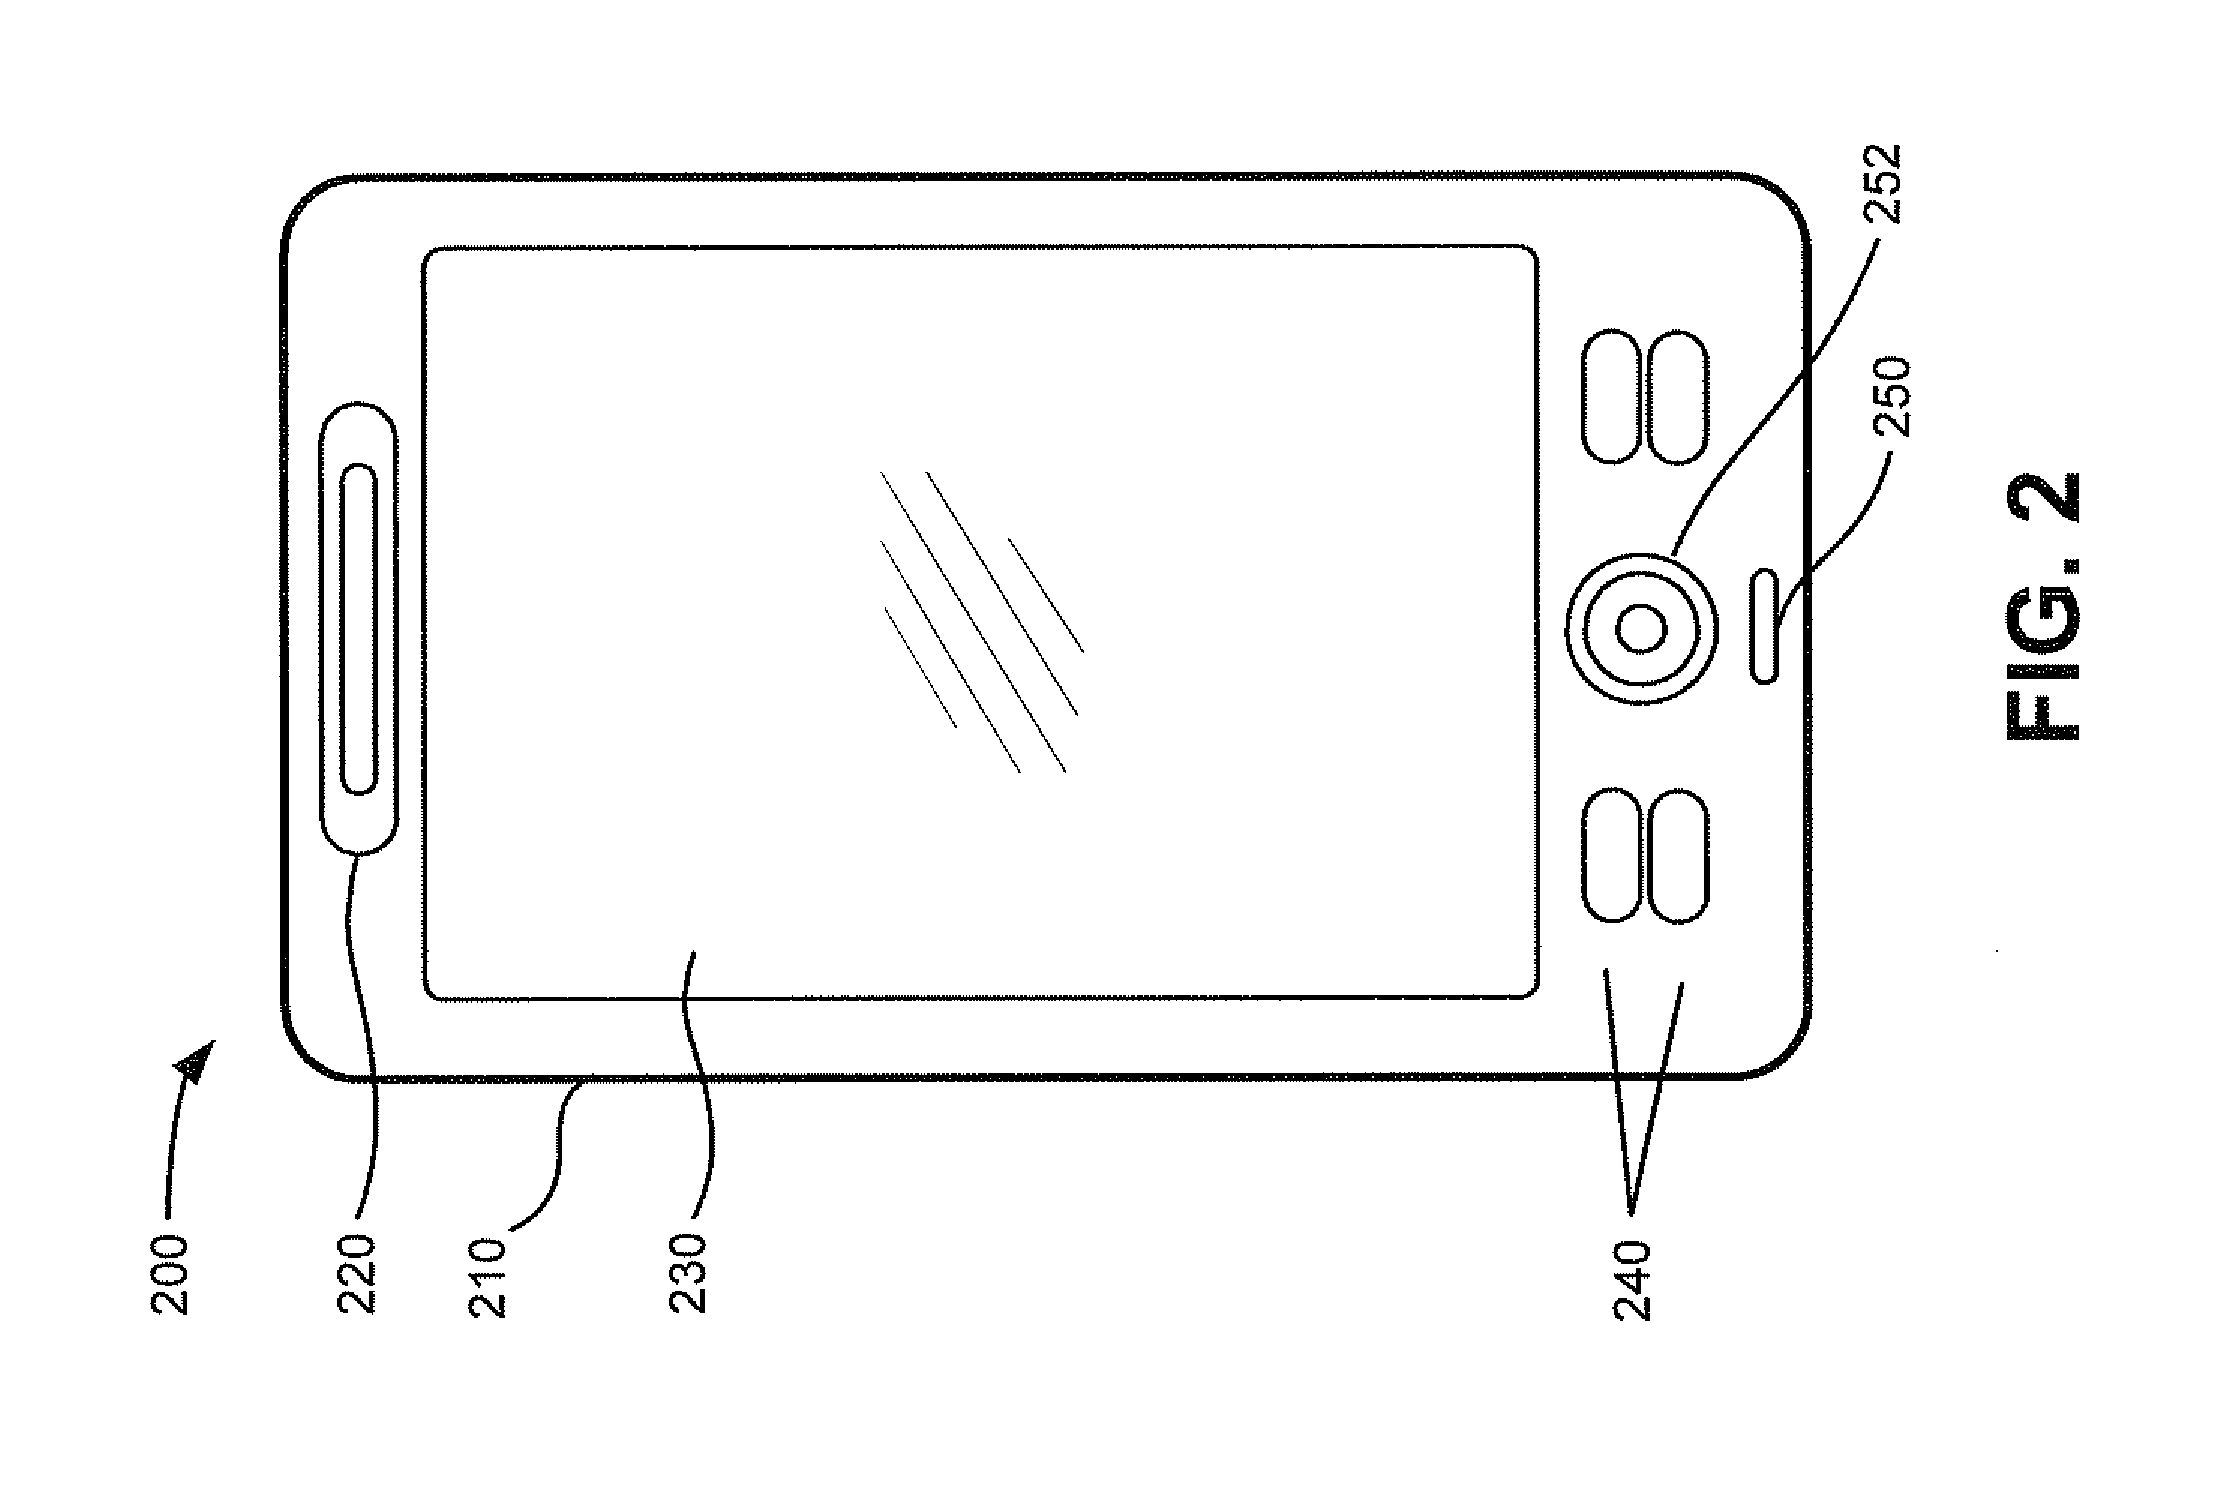 Graphical flash view of documents for data navigation on a touch-screen device